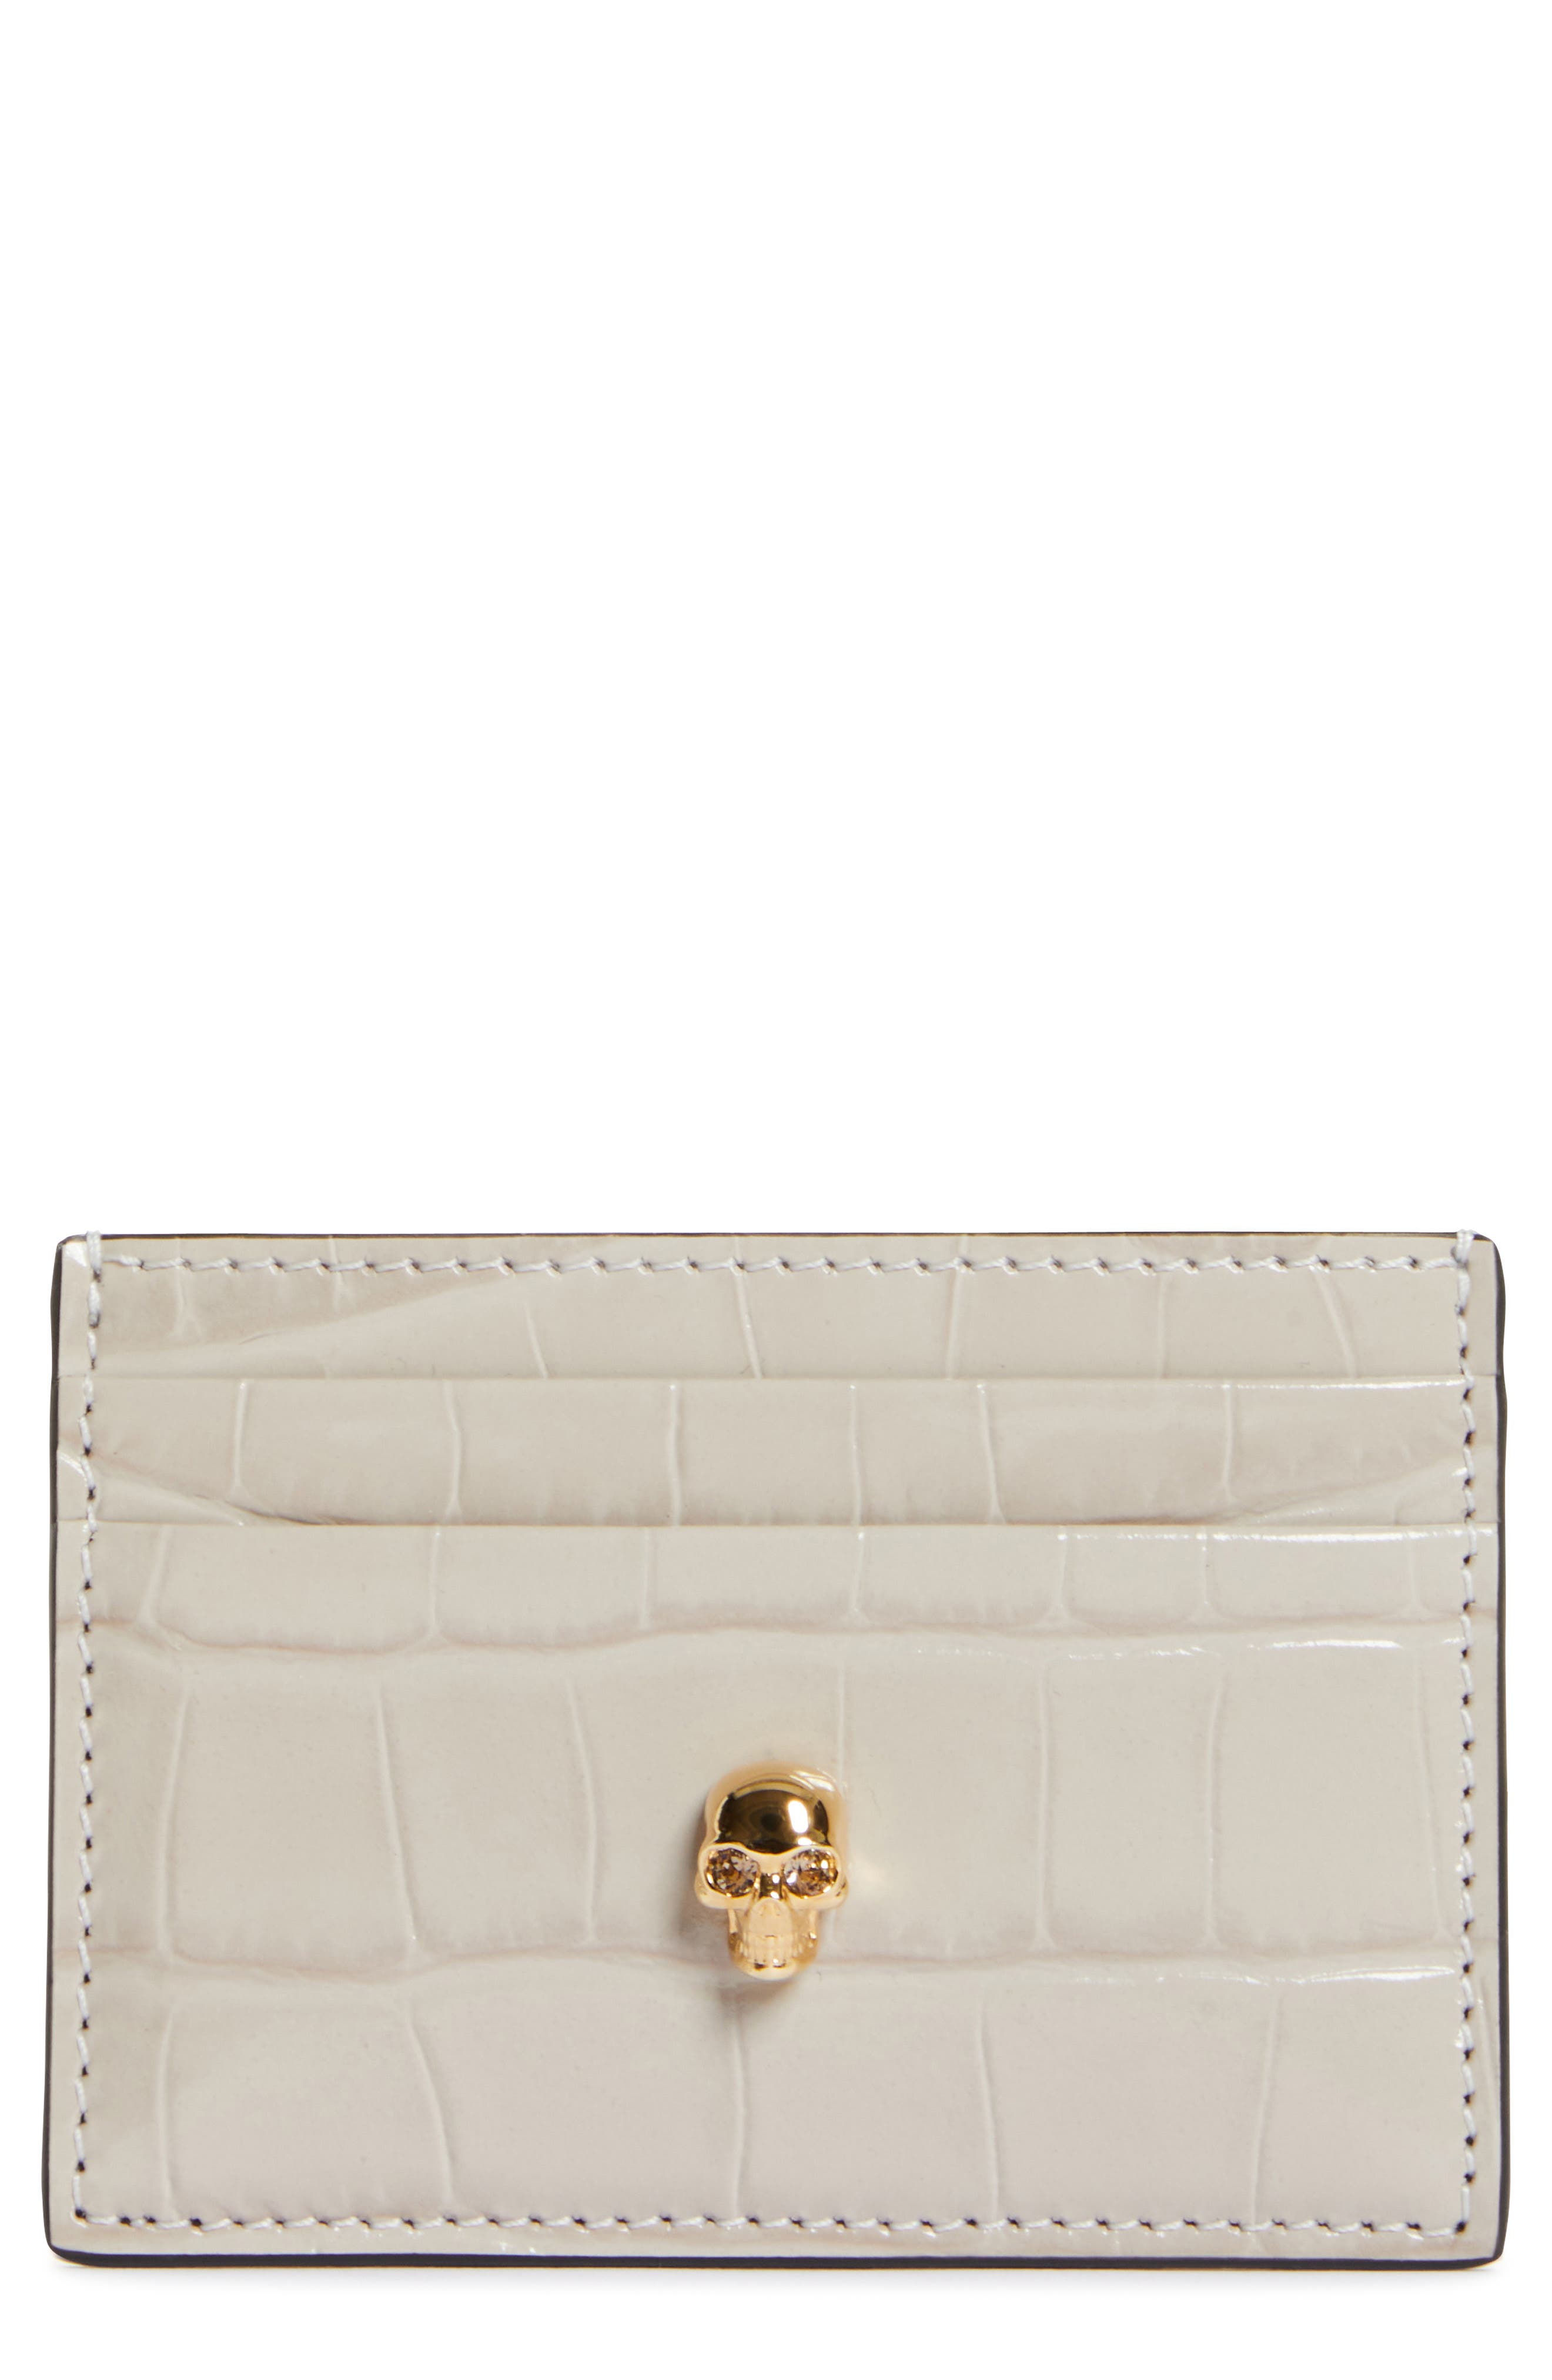 Alexander McQueen Croc Embossed Leather Card Case in Faded Grey at Nordstrom